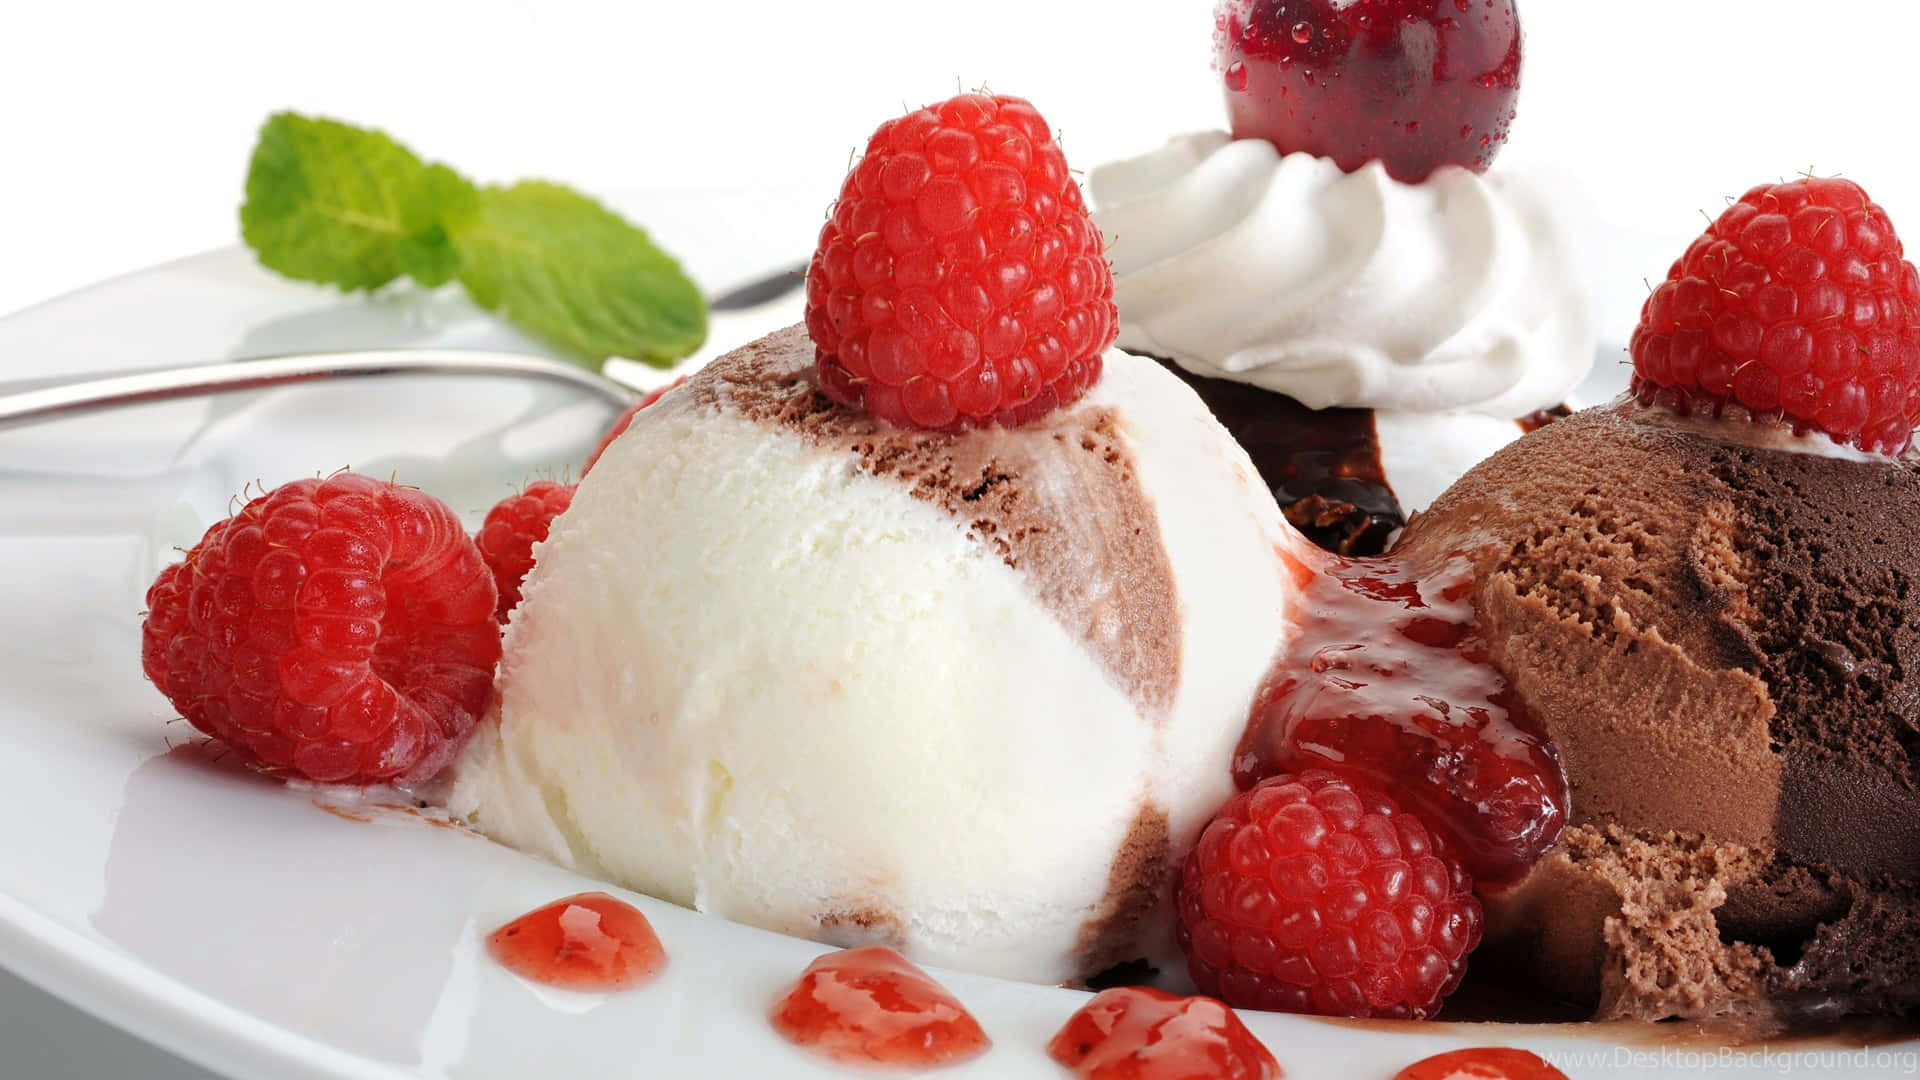 A delicious and indulgent dessert to enjoy